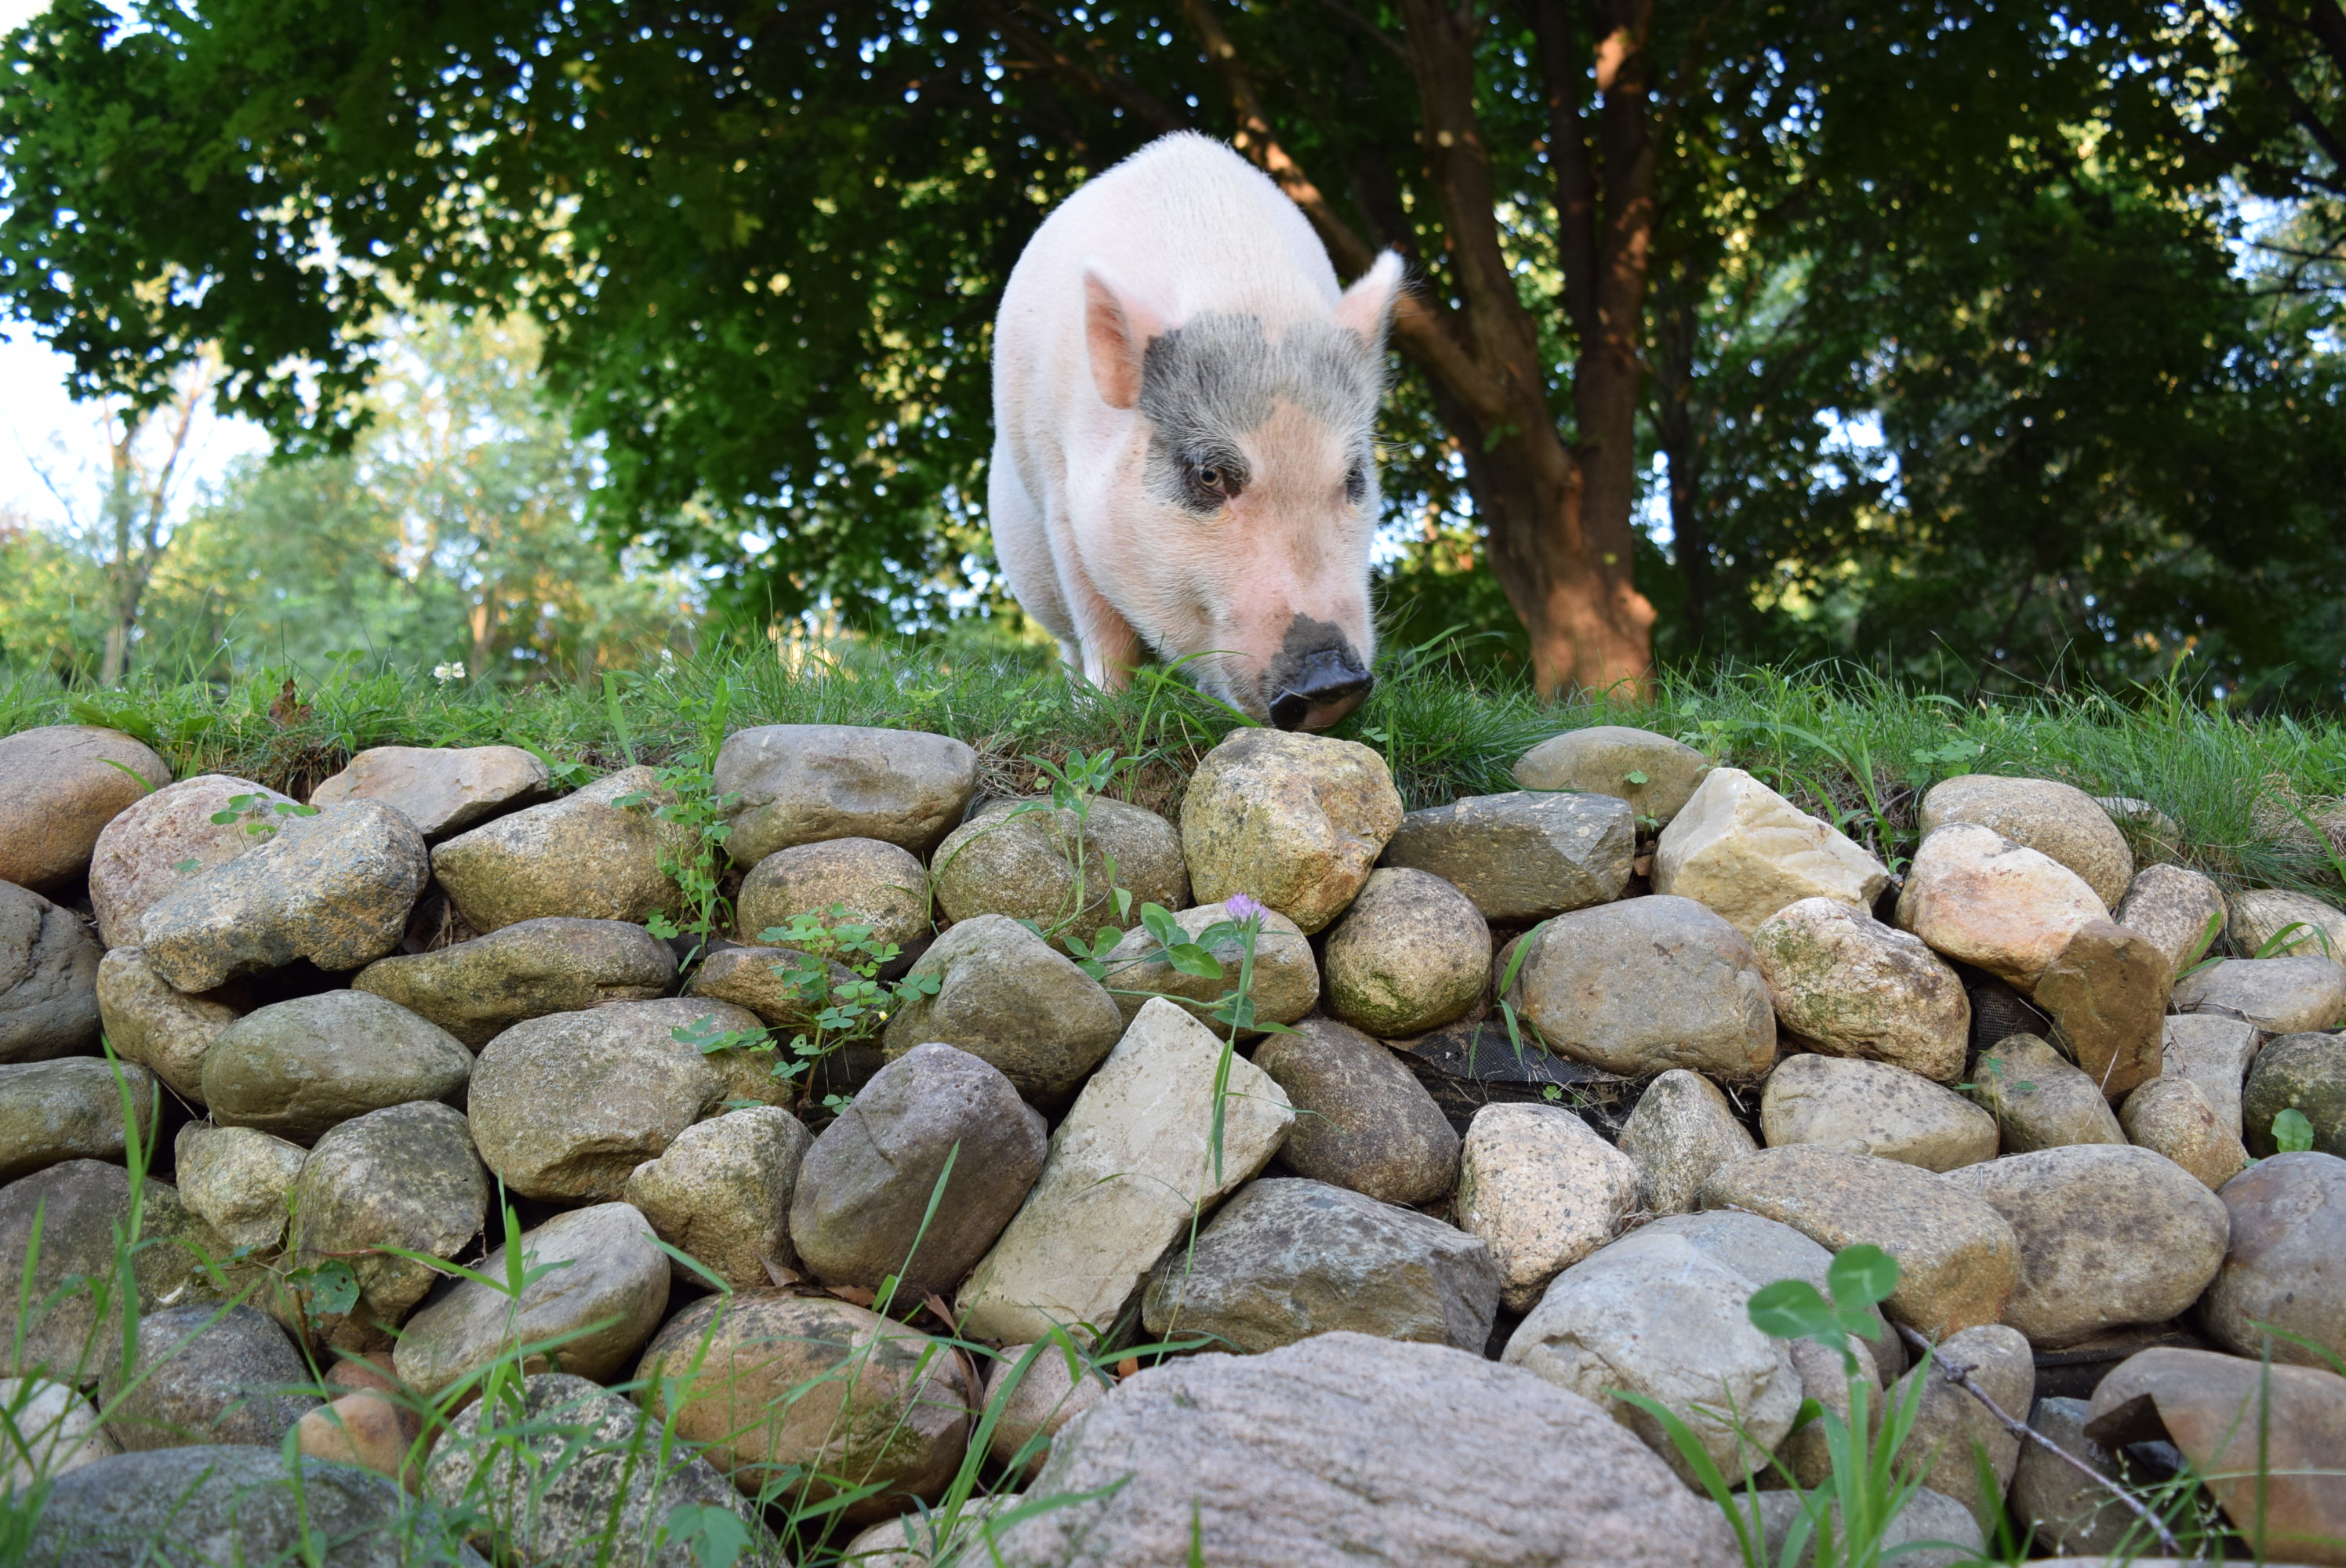 Fiona is trimming up the grass next to the rock wall.